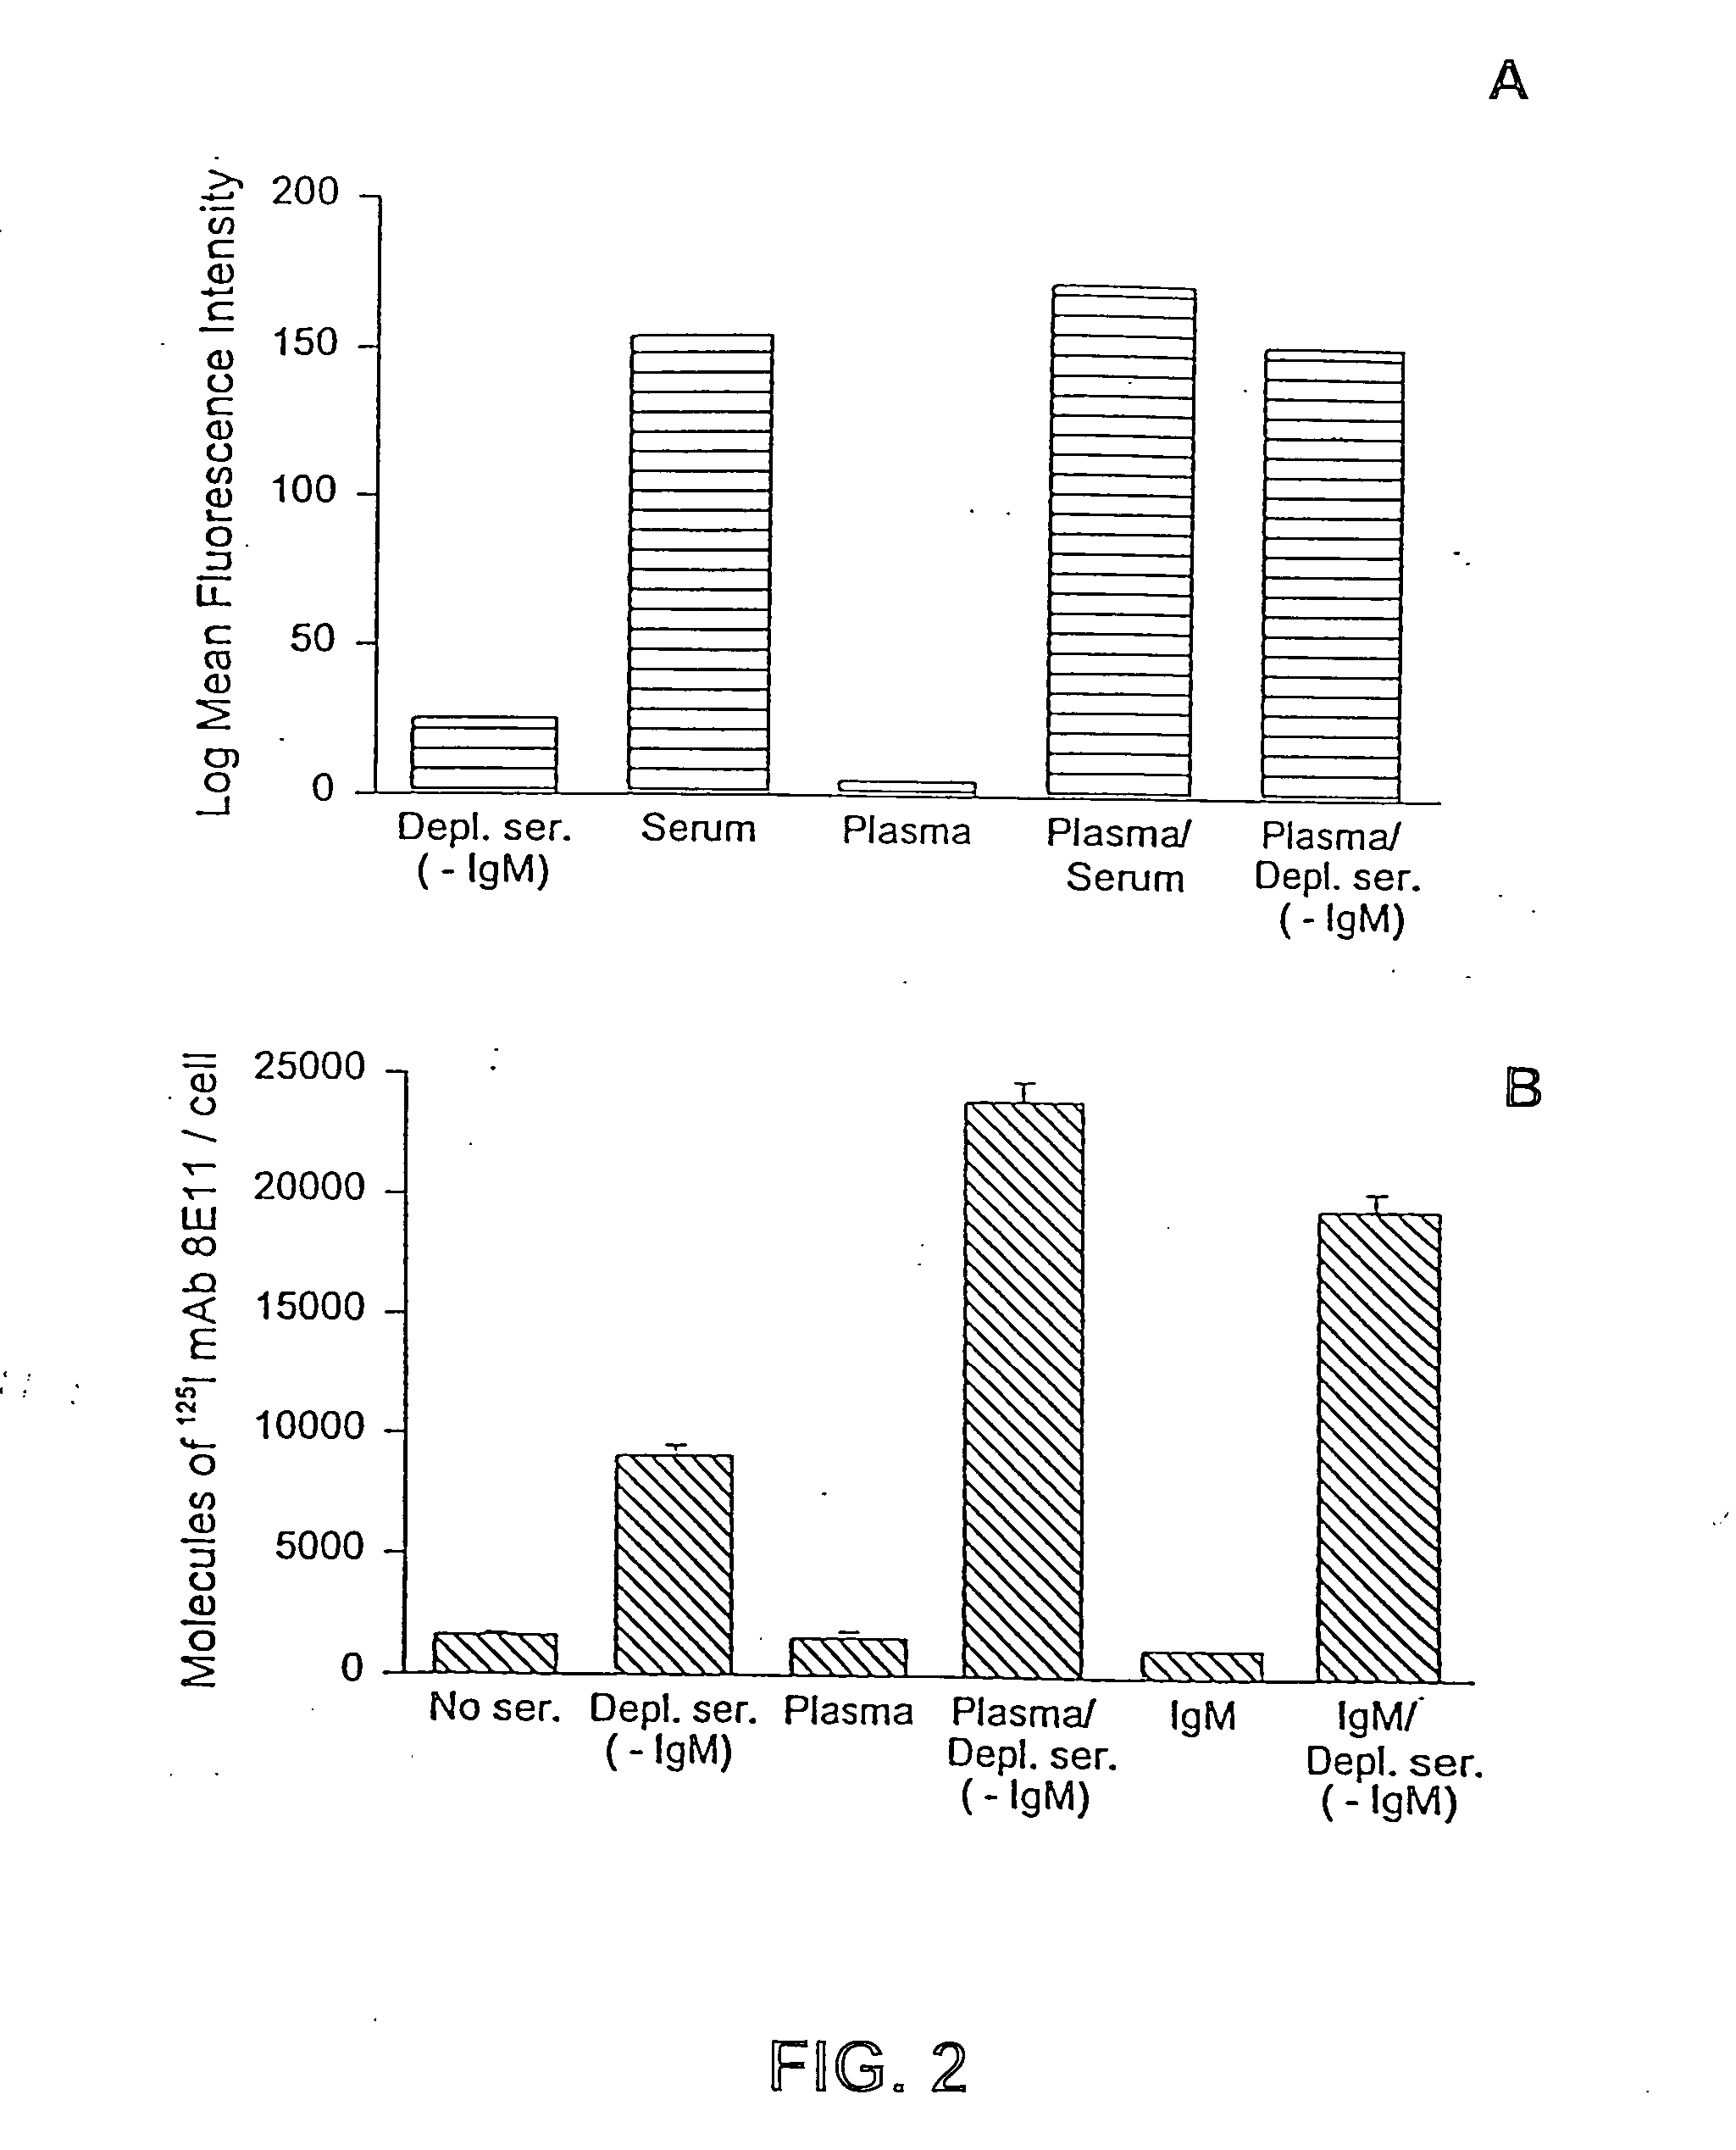 Antibodies to a tumor-associated surface antigen for delivery of diagnostic and therapeutic agents